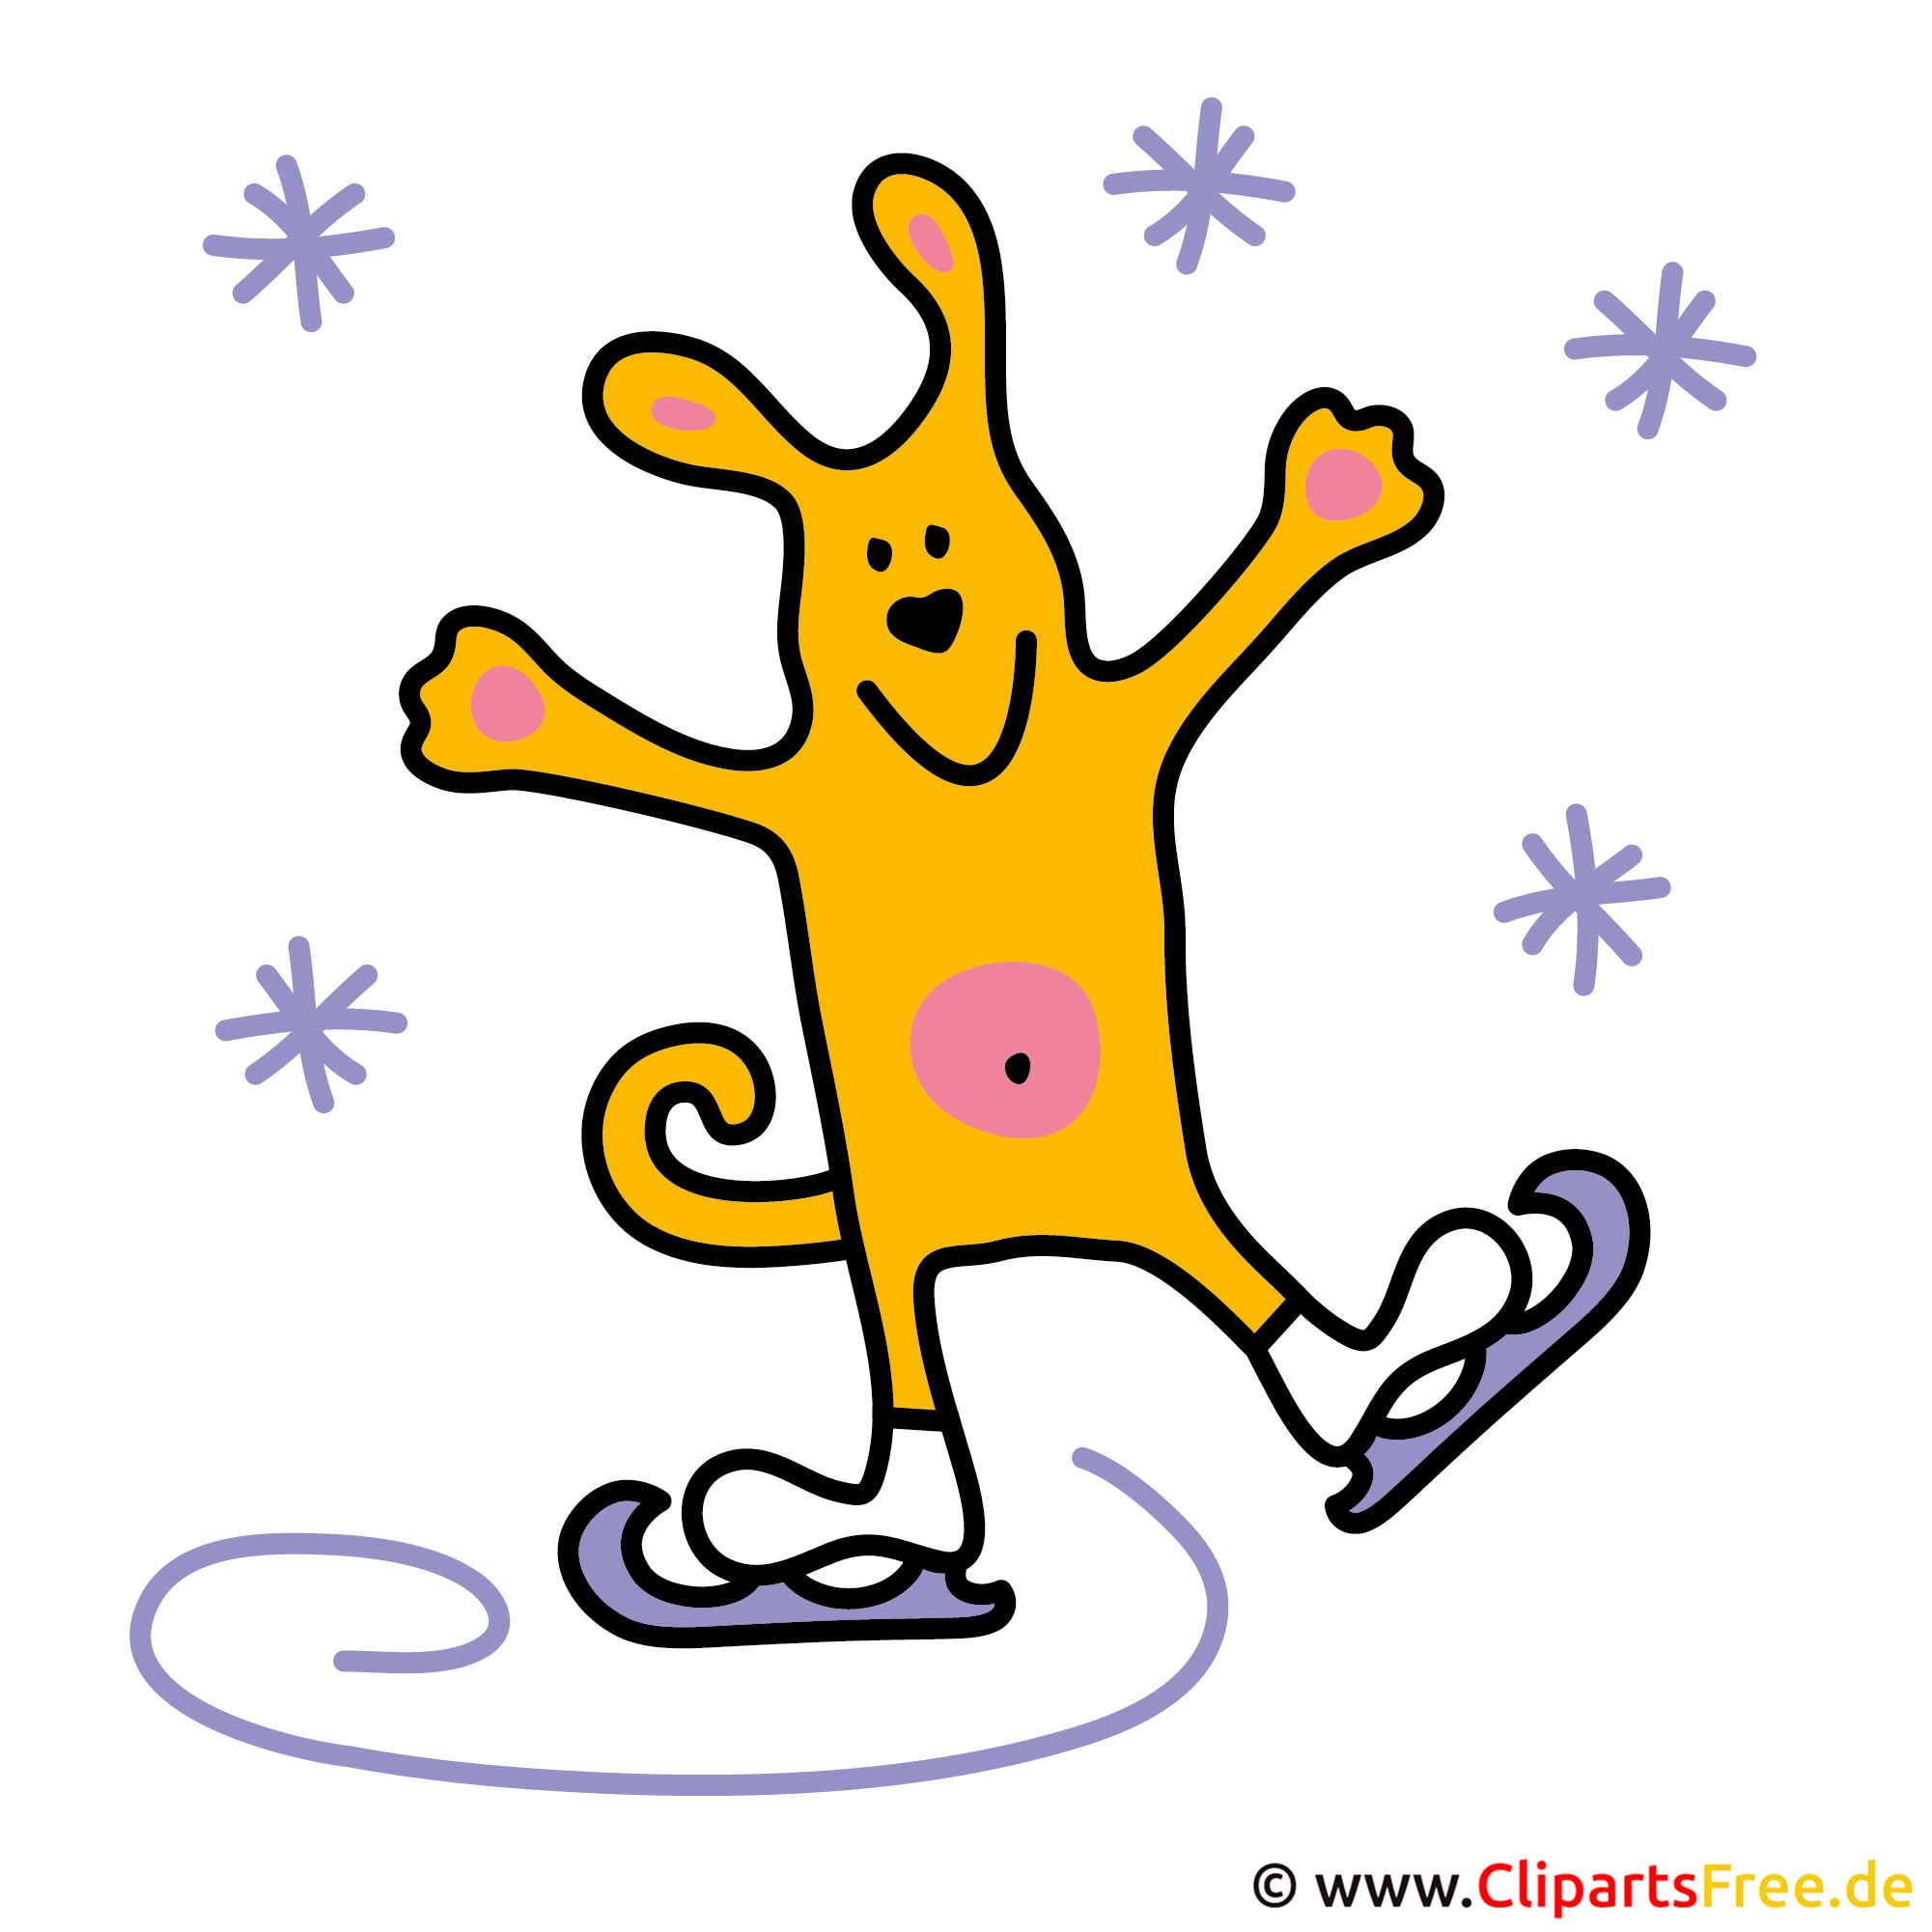 om clipart free download - photo #44